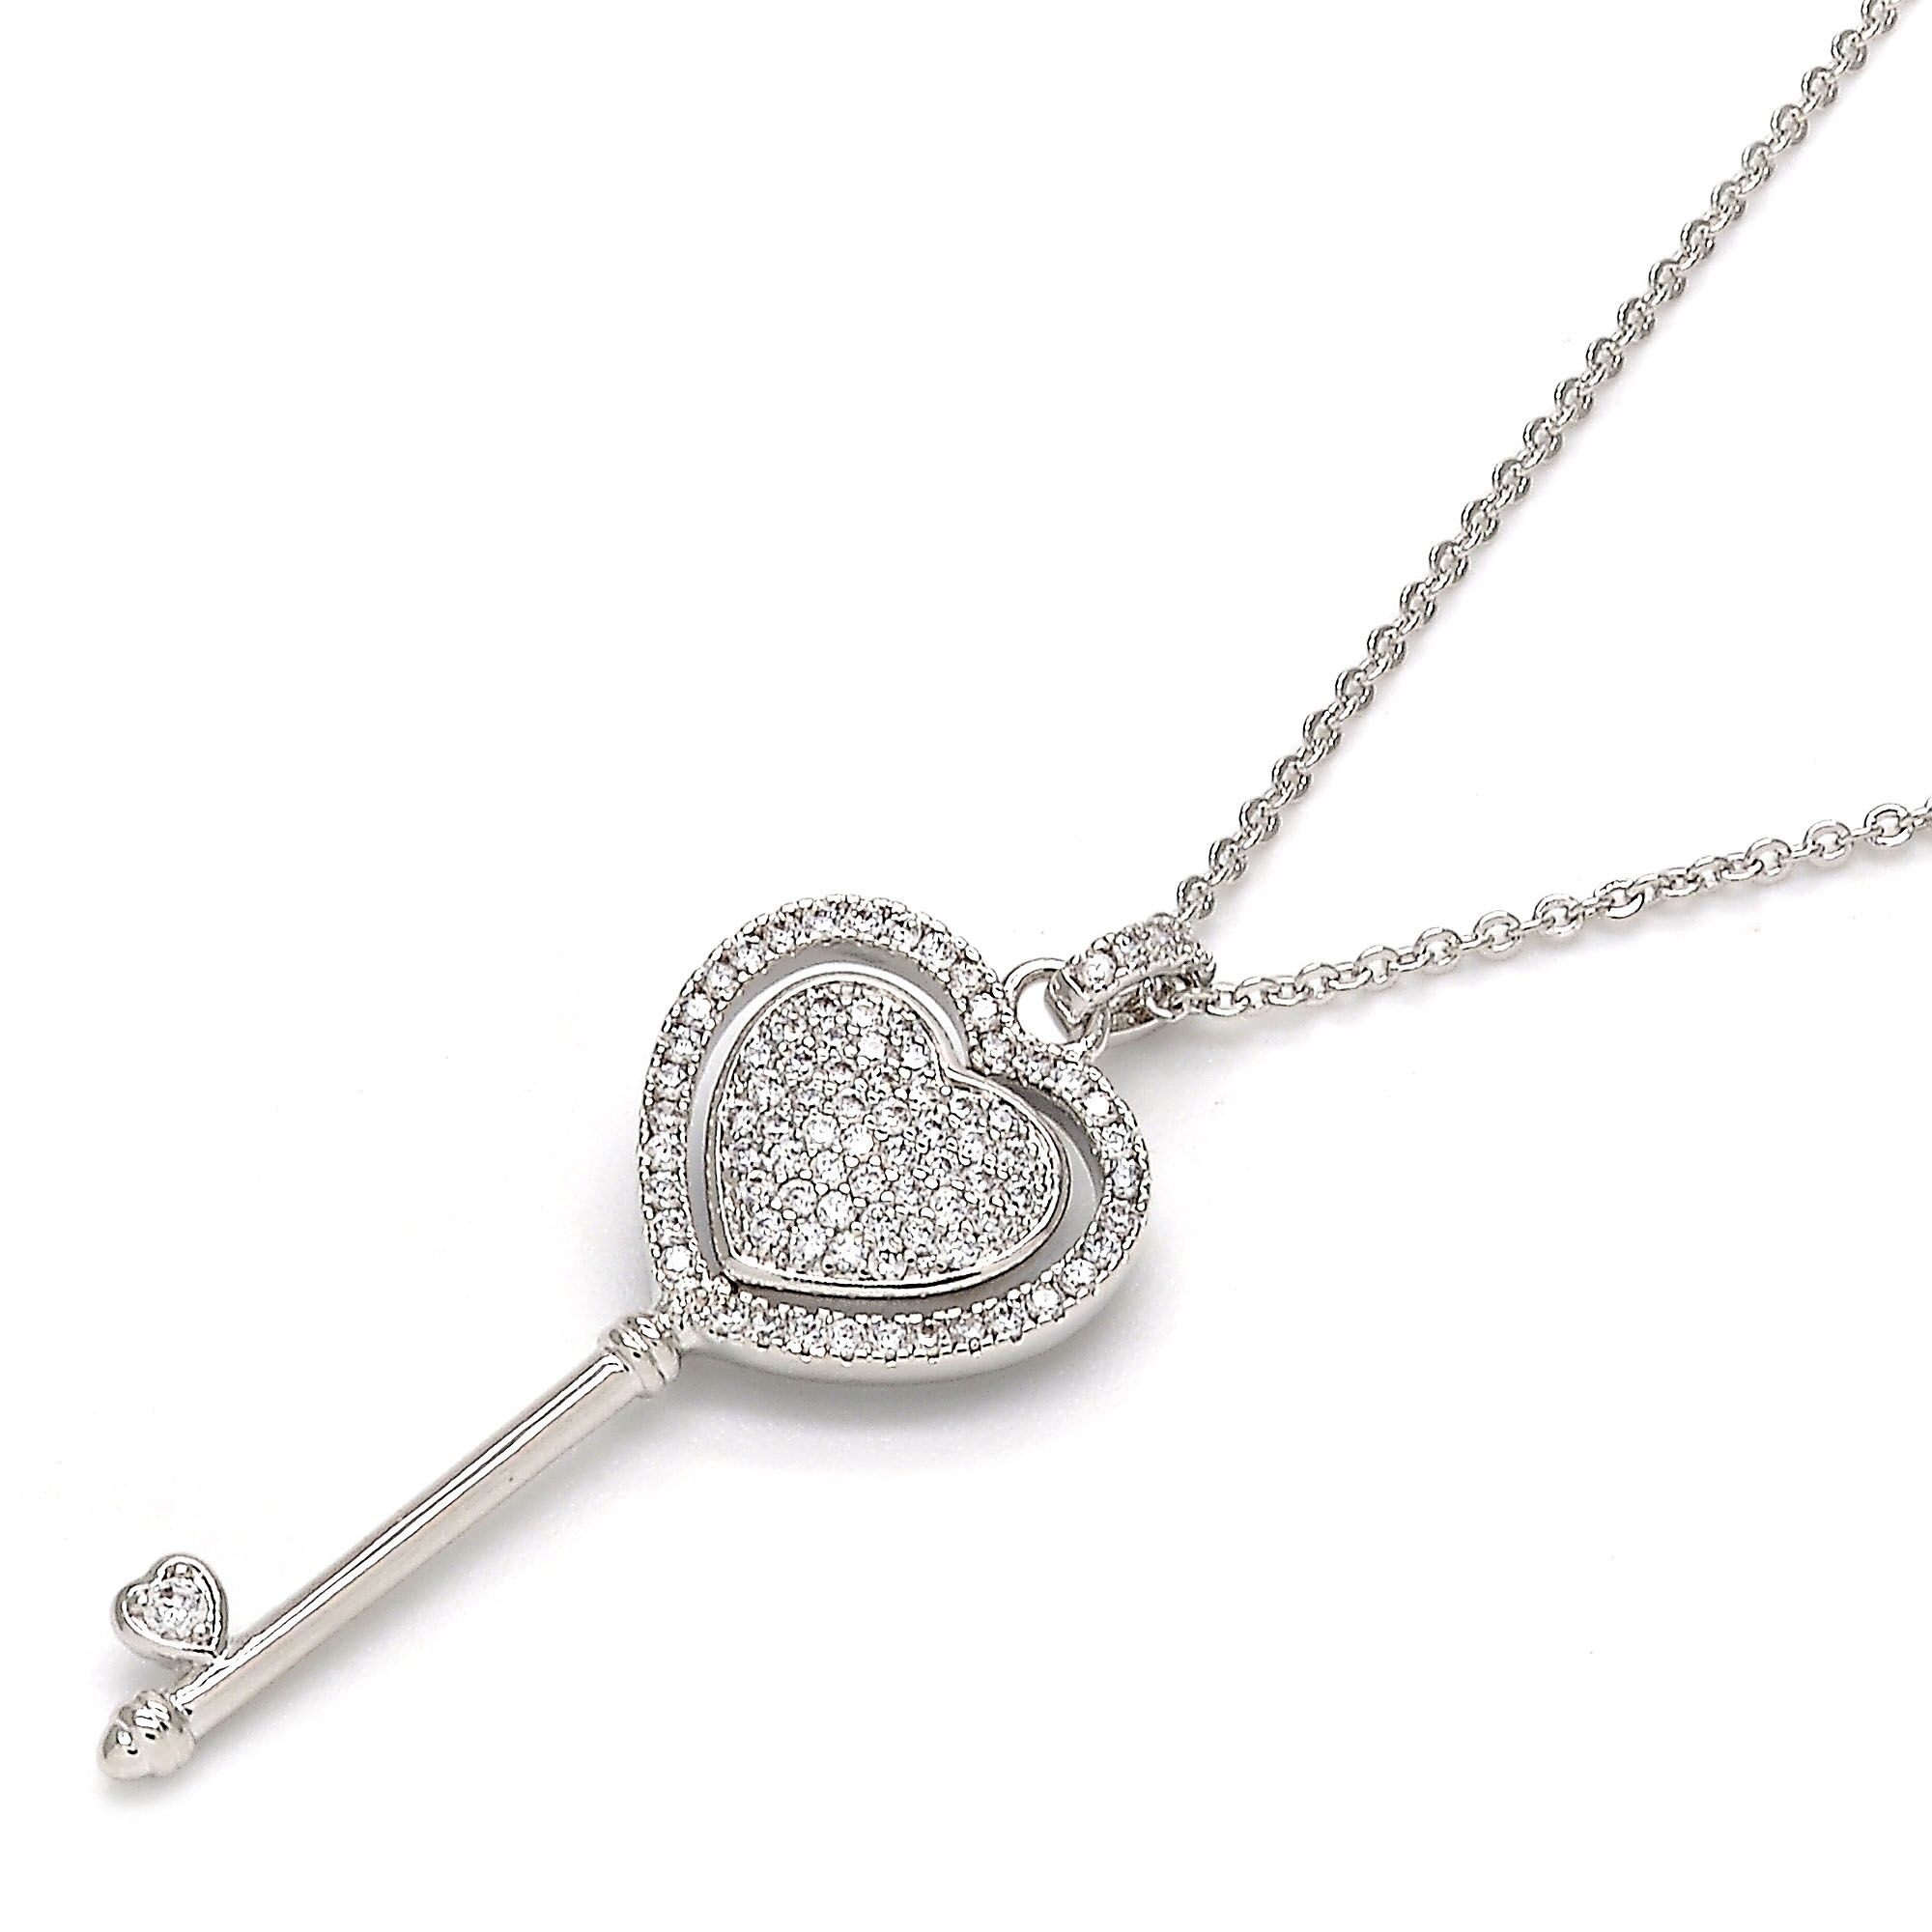 Sterling Silver Fancy Necklace, Key And Heart Design, With Crystals And Micro Pave, Rhodium Tone